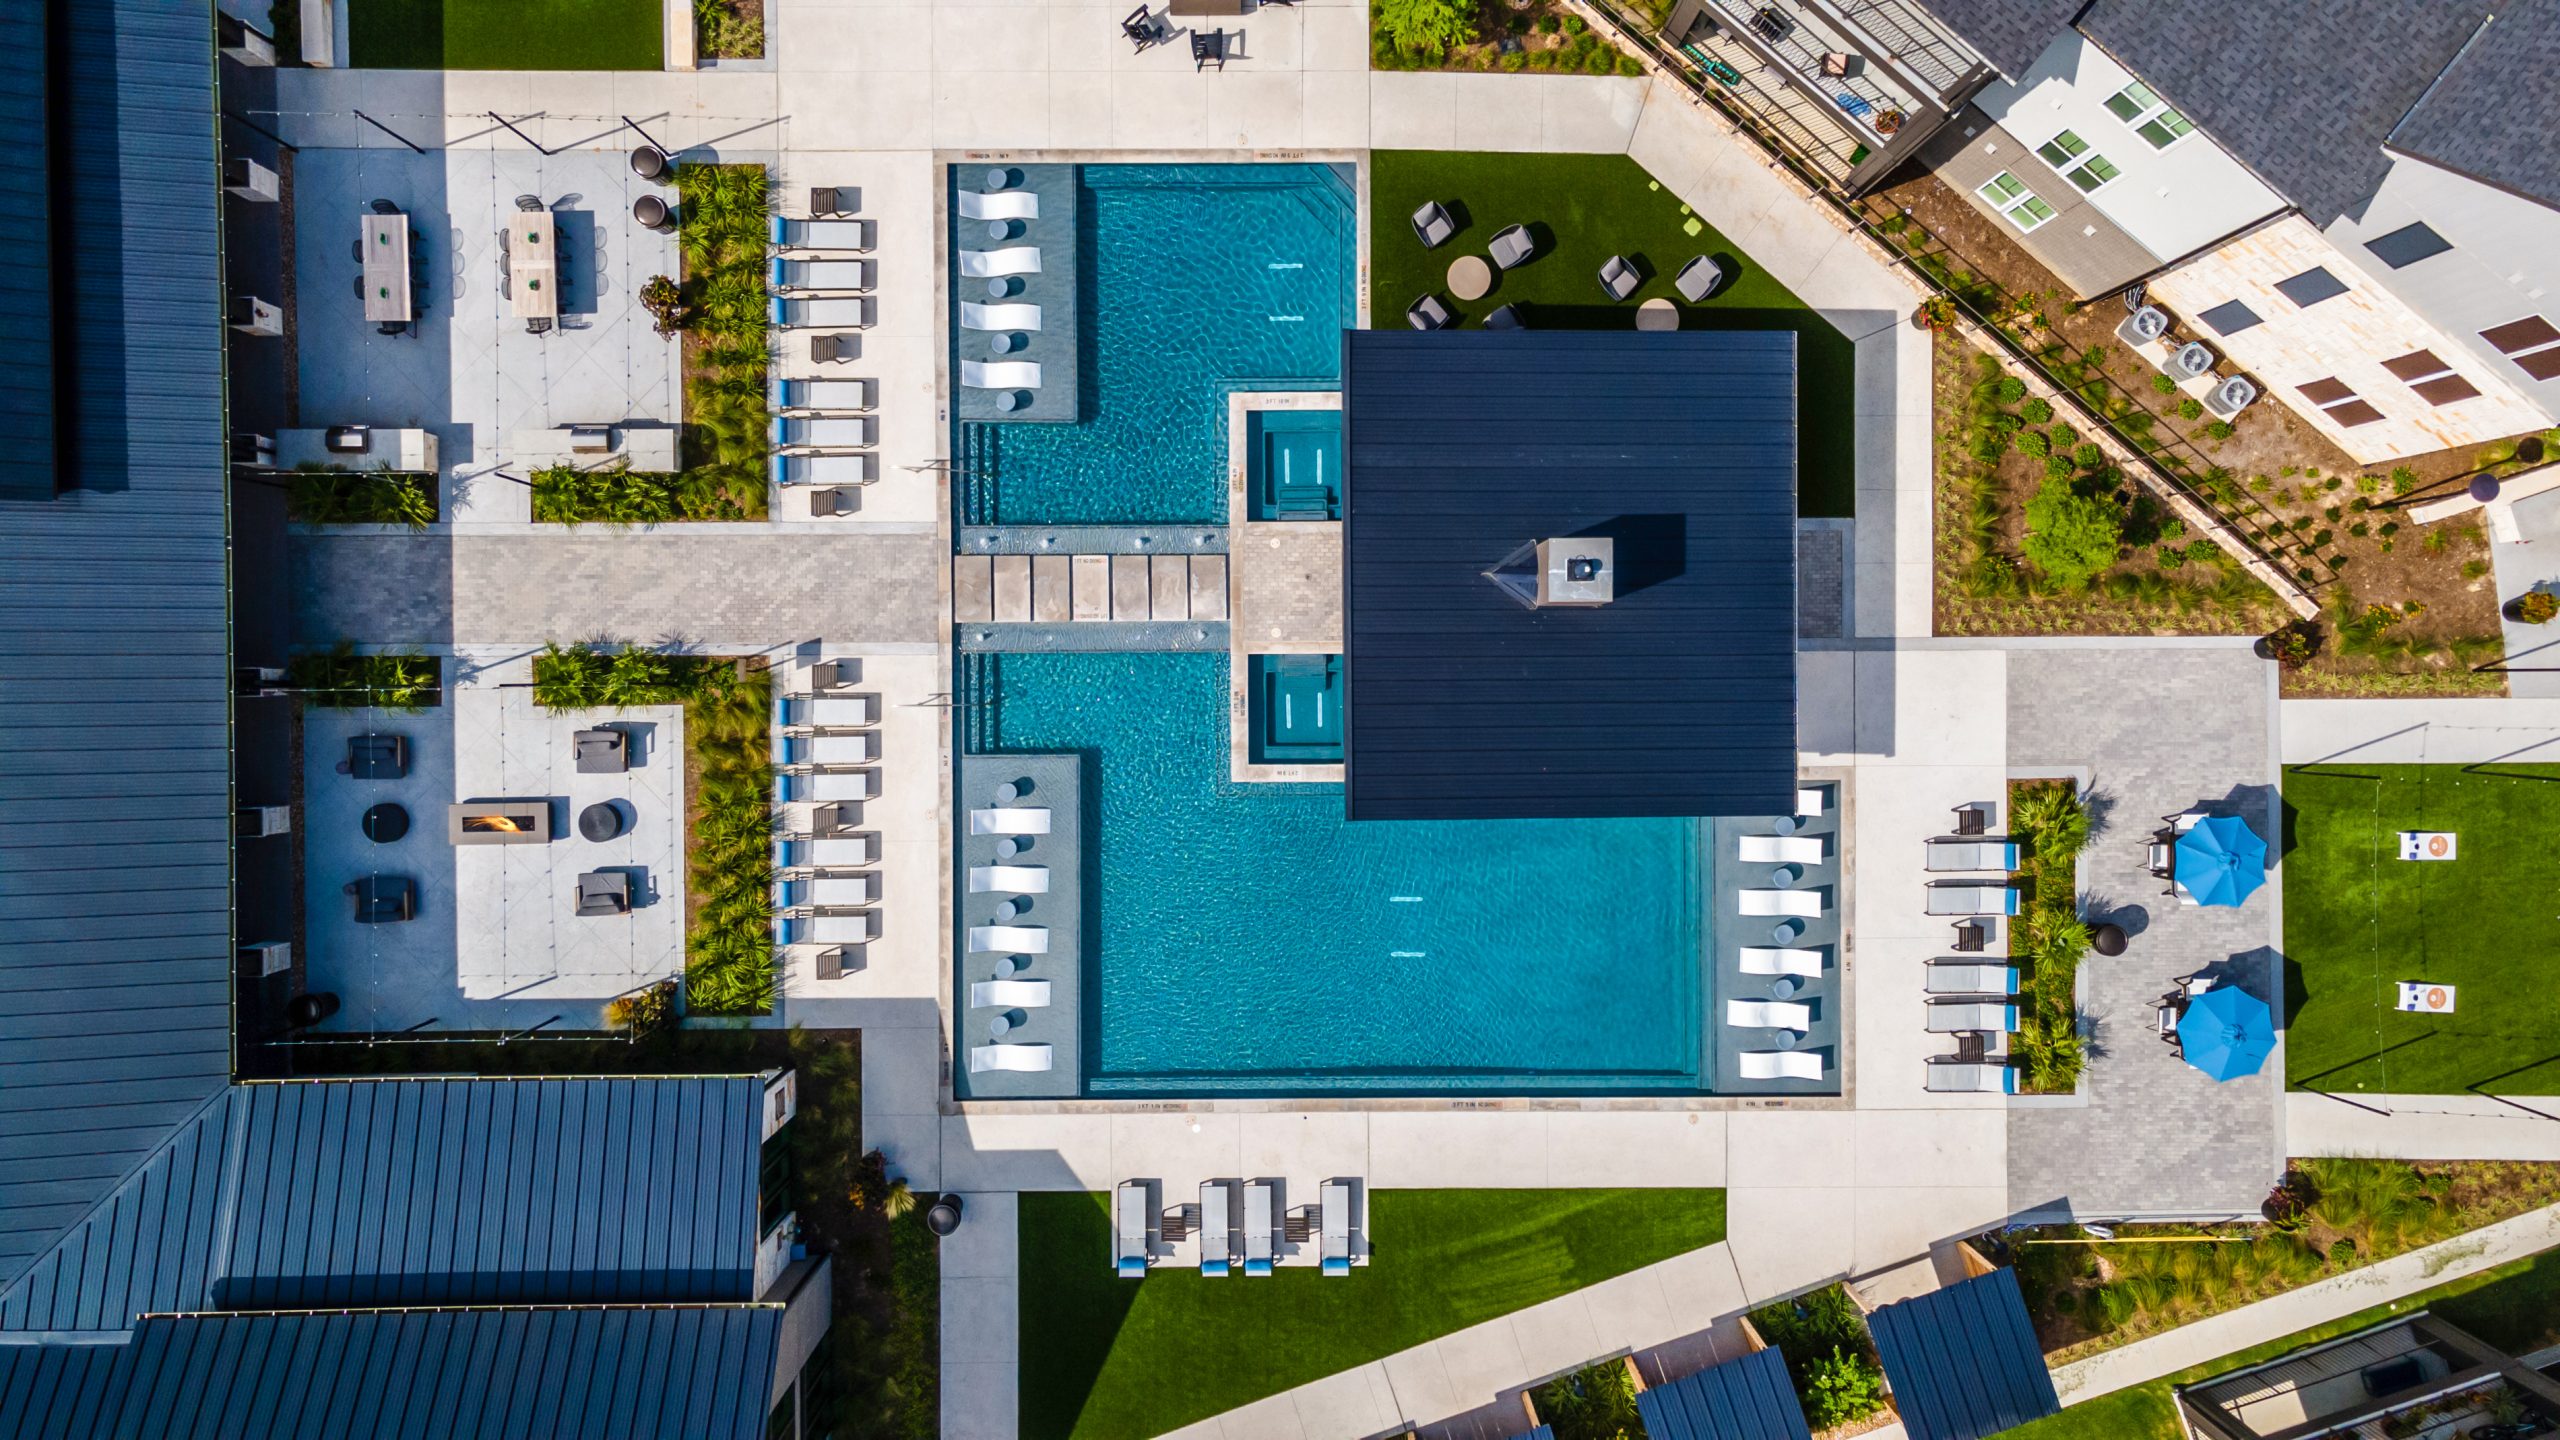 Image of a commercial apartment complex's pool and recreation areas